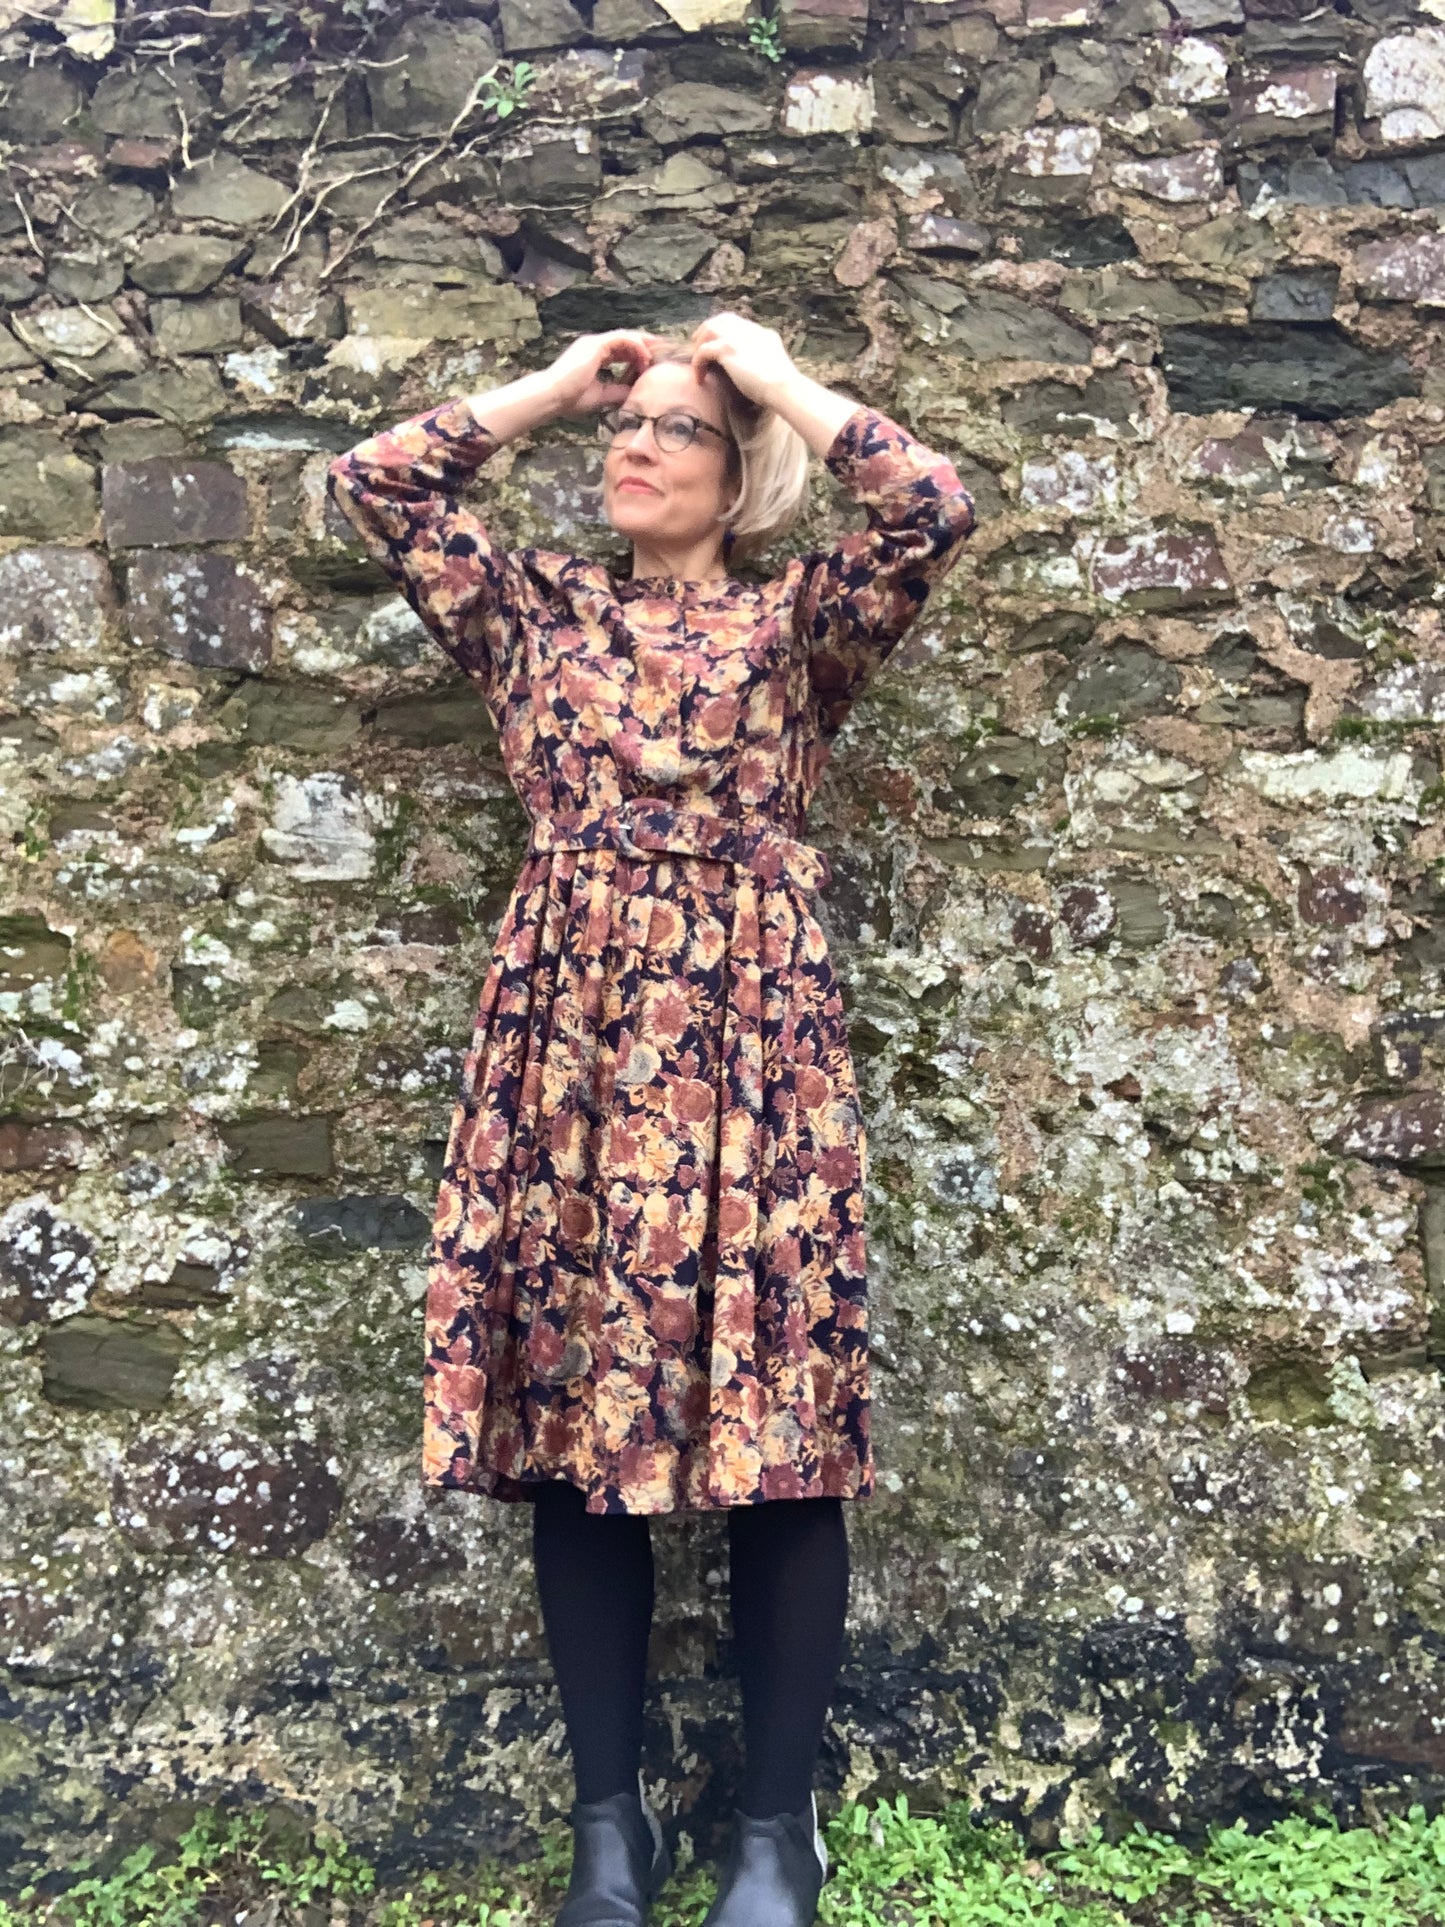 Vintage 1980’s floral shirtwaister dress by St Michael